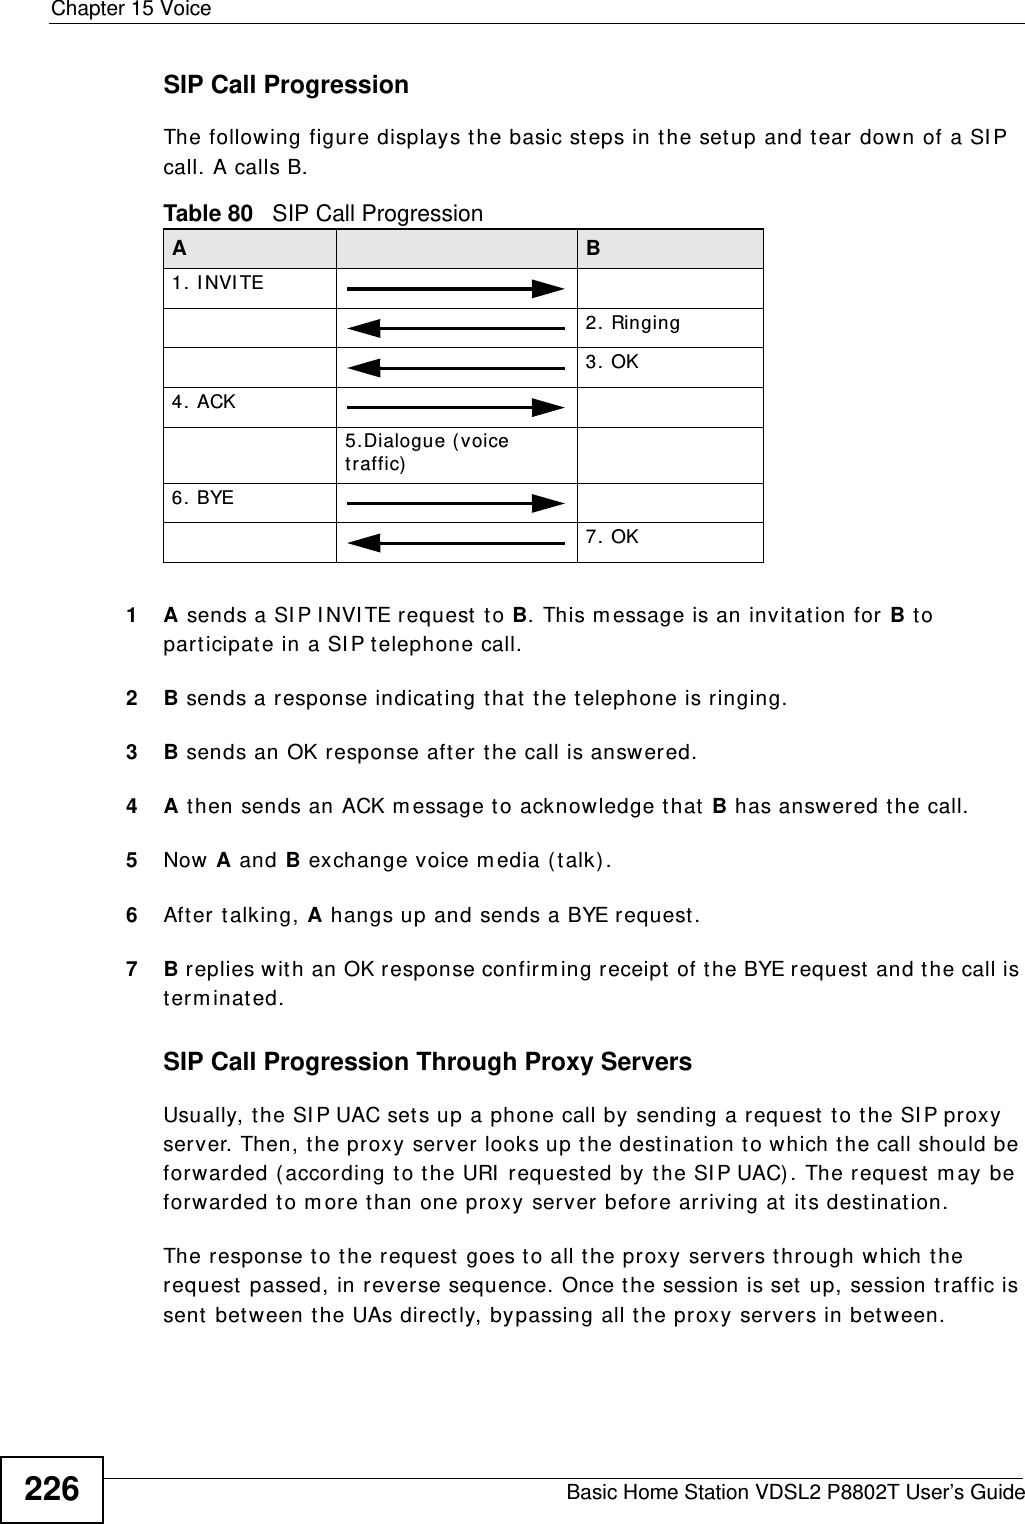 Chapter 15 VoiceBasic Home Station VDSL2 P8802T User’s Guide226SIP Call ProgressionThe following figure displays t he basic steps in the set up and tear down of a SI P call. A calls B. 1 A sends a SI P I NVI TE request to B. This m essage is an invit ation for B to participat e in a SI P telephone call. 2 B sends a response indicating t hat the t elephone is ringing.3 B sends an OK response after the call is answered. 4 A then sends an ACK m essage to acknowledge t hat B has answered t he call. 5Now A and B exchange voice m edia ( t alk) . 6Aft er t alking, A hangs up and sends a BYE request . 7 B replies wit h an OK response confirm ing receipt of the BYE request  and the call is ter m inated.SIP Call Progression Through Proxy ServersUsually, the SI P UAC sets up a phone call by sending a request  t o the SI P proxy server. Then, t he proxy server looks up t he destinat ion t o which t he call should be forwarded ( according to t he URI  request ed by the SI P UAC). The request  m ay be forwarded t o m ore t han one proxy server before arriving at it s dest inat ion. The response to t he request  goes to all the proxy servers t hrough which t he request passed, in reverse sequence. Once the session is set up, session traffic is sent between the UAs directly, bypassing all the proxy servers in bet ween.Table 80   SIP Call ProgressionA B1. I NVI TE2. Ringing3. OK4. ACK 5.Dialogue ( voice traffic)6. BYE7. OK